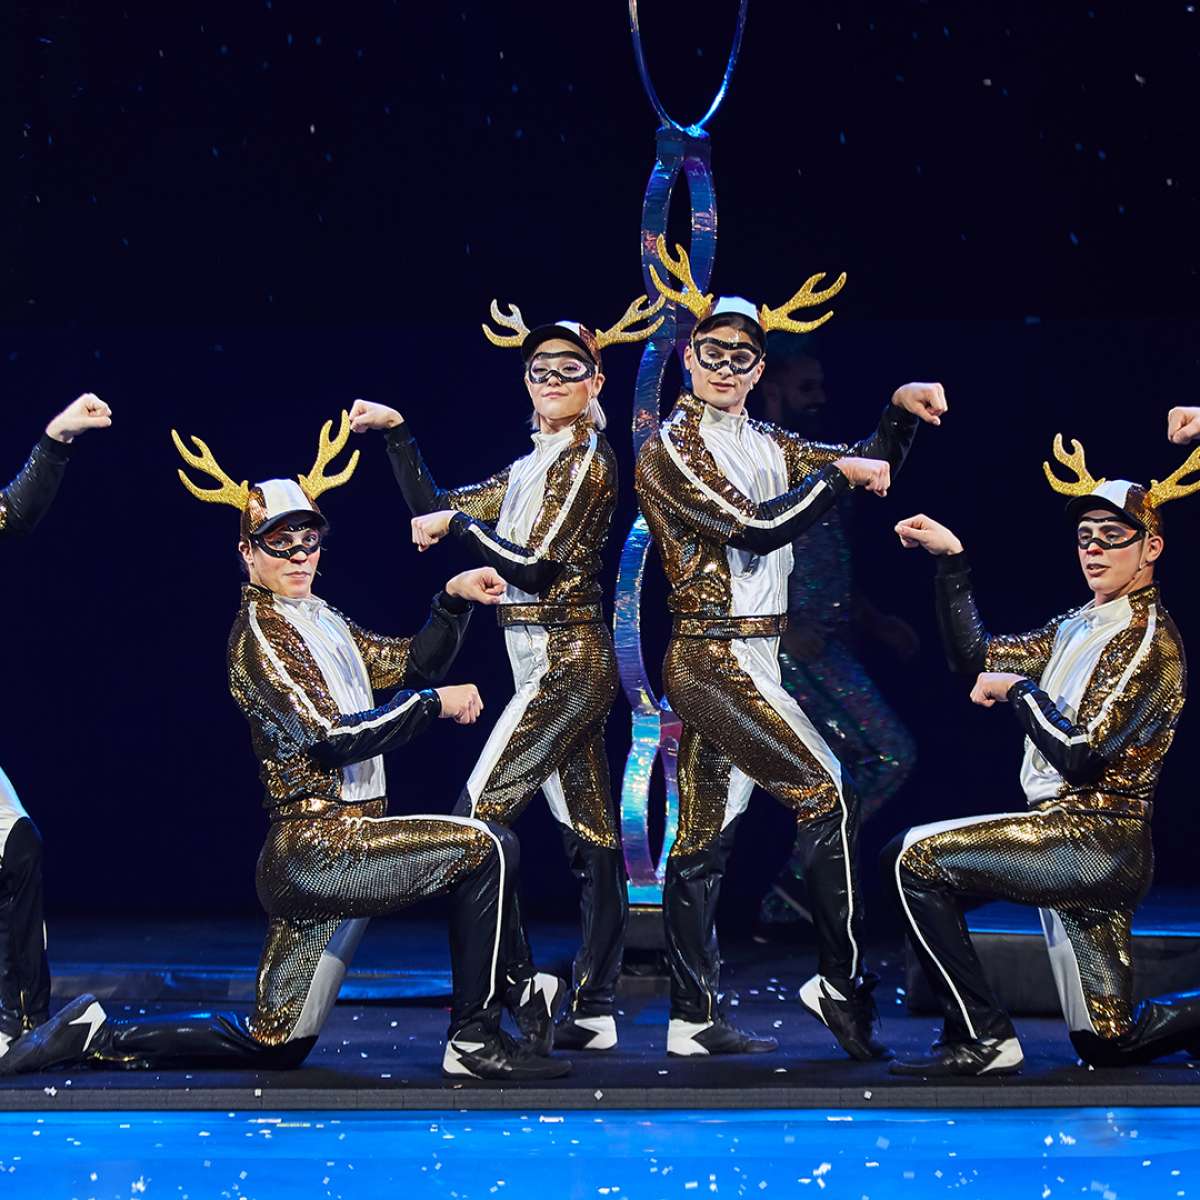 "'Twas the Night Before..." by Cirque du Soleil returns to The Chicago